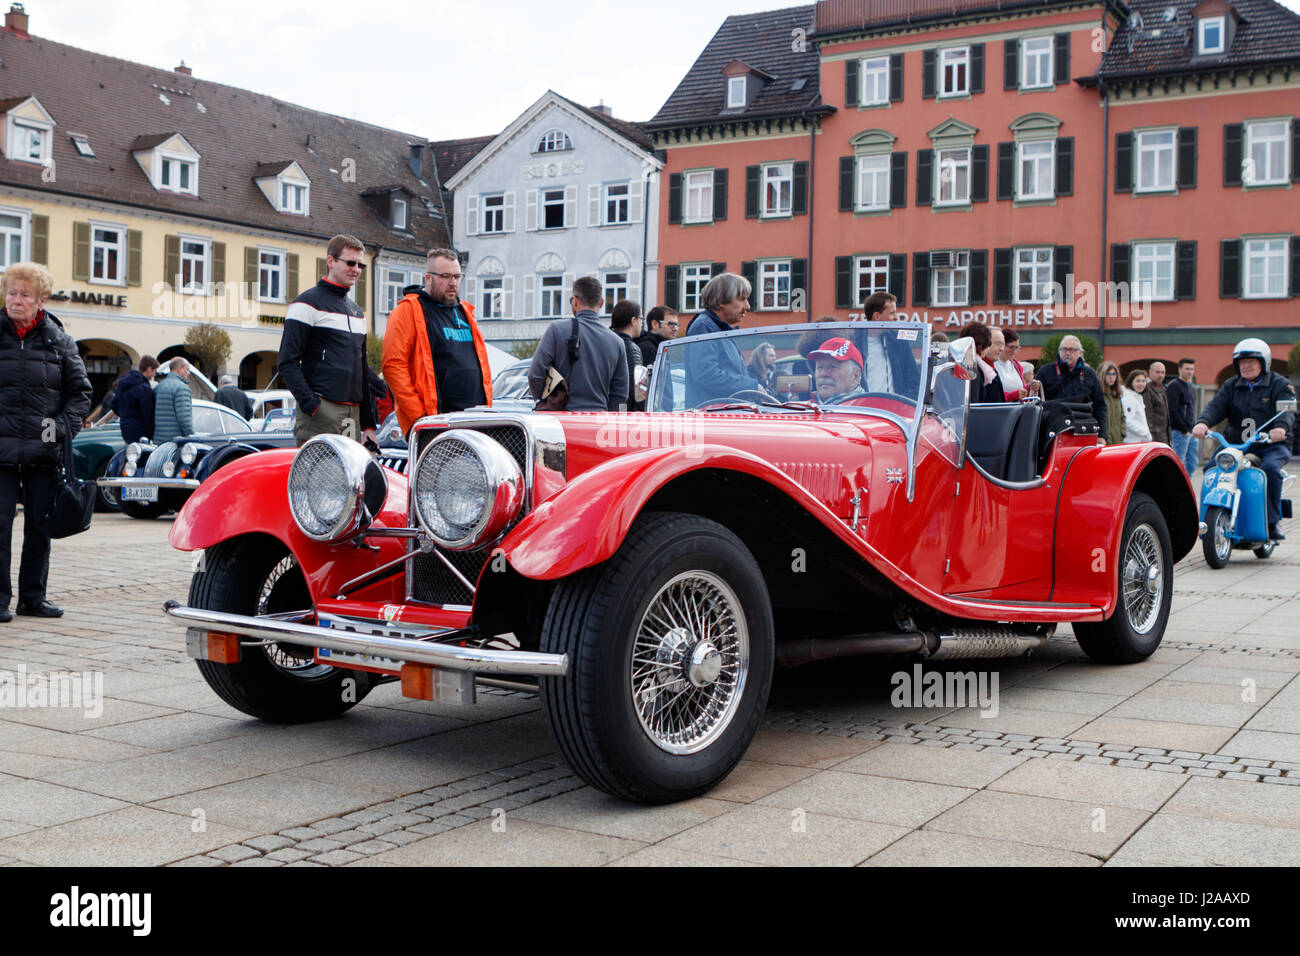 LUDWIGSBURG, GERMANY - APRIL 23, 2017: Panther J72 oldtimer car at the eMotionen event on April 23, 2017 in Ludwigsburg, Germany. Front side view. Stock Photo